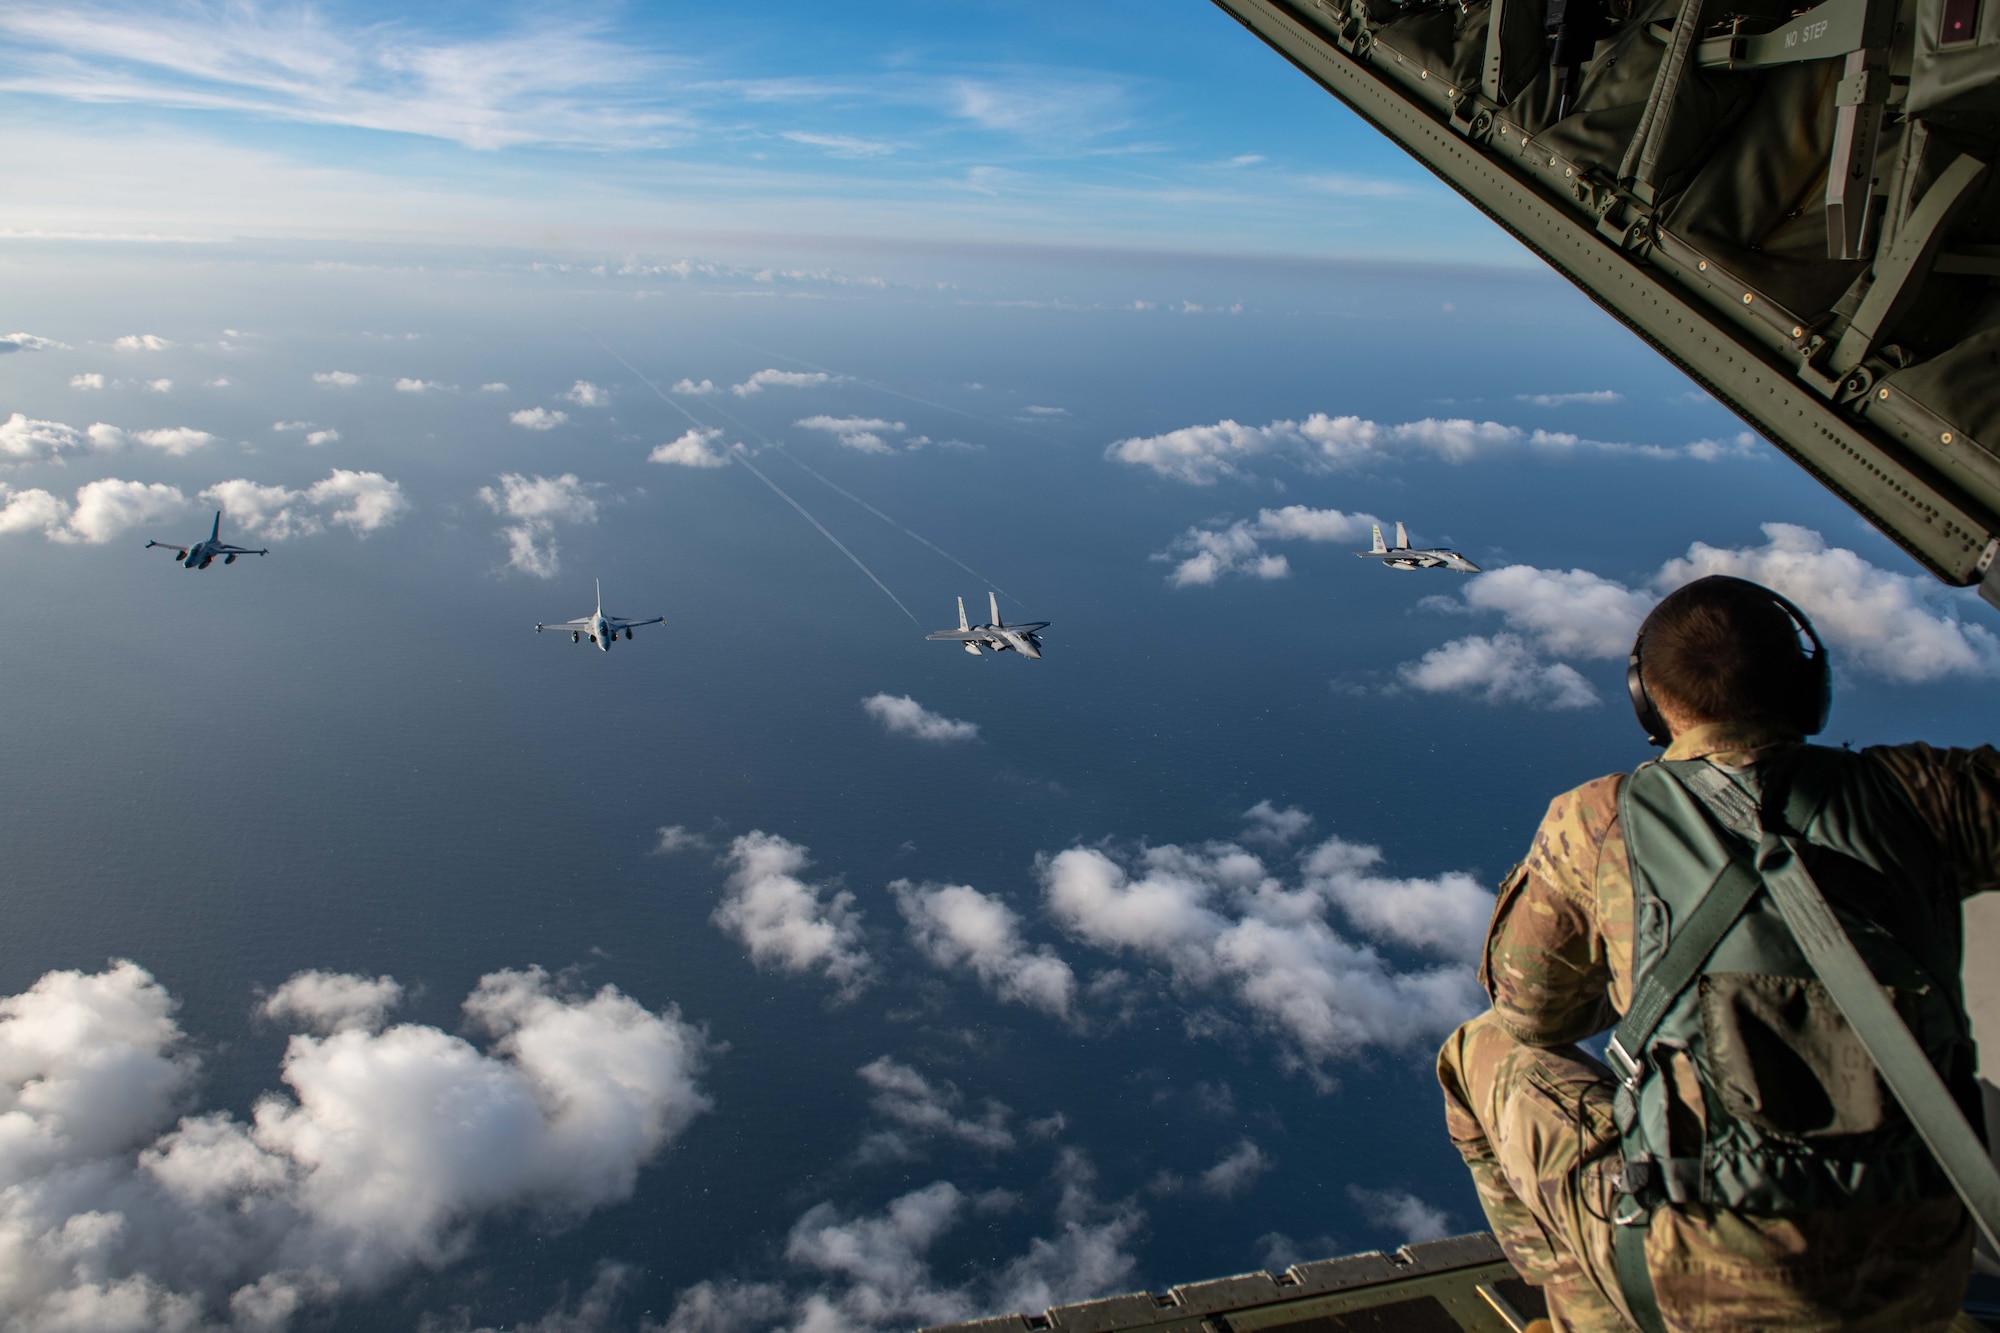 U.S. Air Force F-15s and Philippine Air Force FA-50s fly in formation in the vicinity of the South China Sea in support of a three-day maritime and aerial cooperation activity, Nov. 21-23. The maritime and aerial cooperation activity demonstrates the Armed Forces of the Philippines and U.S. Indo-Pacific Command’s commitment to a free and open Indo-Pacific Region. U.S. forces routinely operate with Allies and partners in defense of the rules-based international order and will continue to do so to maintain peace and stability in the region. (U.S. Air Force photo by Airman 1st Class Alexis Redin)